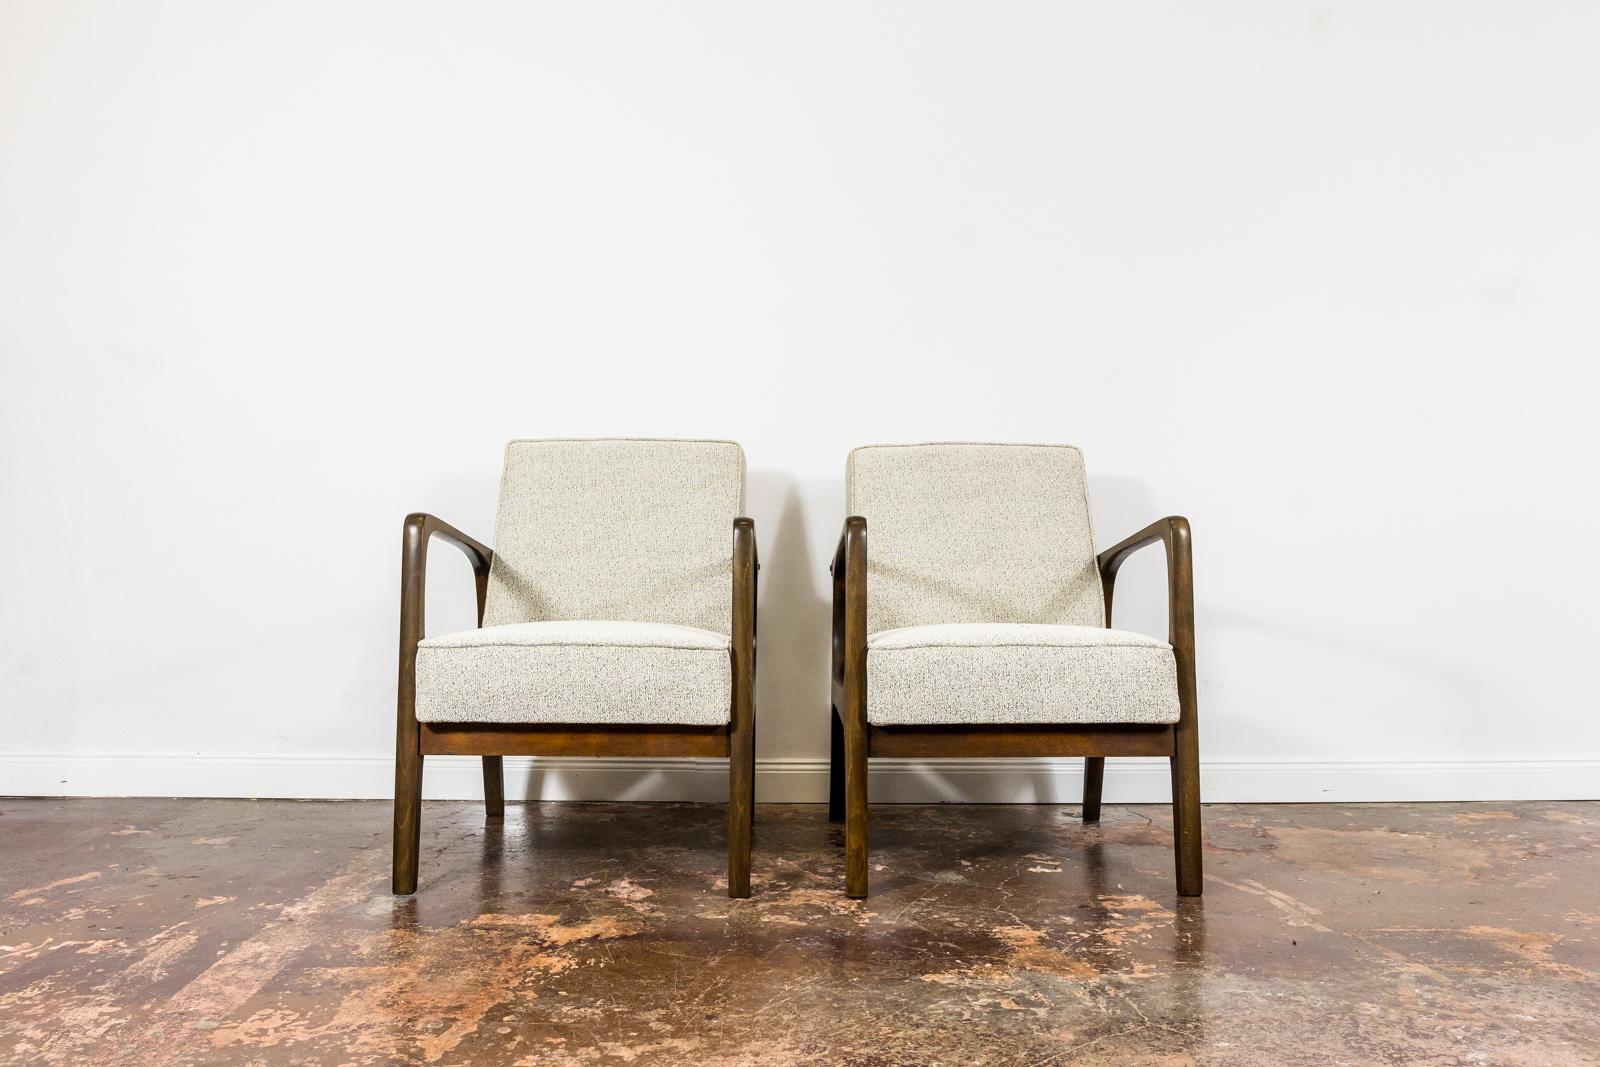 Pair of  Mid-Century armchairs from Prudnickie Fabryki Mebli 1960's, Poland.
Solid beech wood frames have been completely restored and refinished.
Reupholstered in black&white fabric.